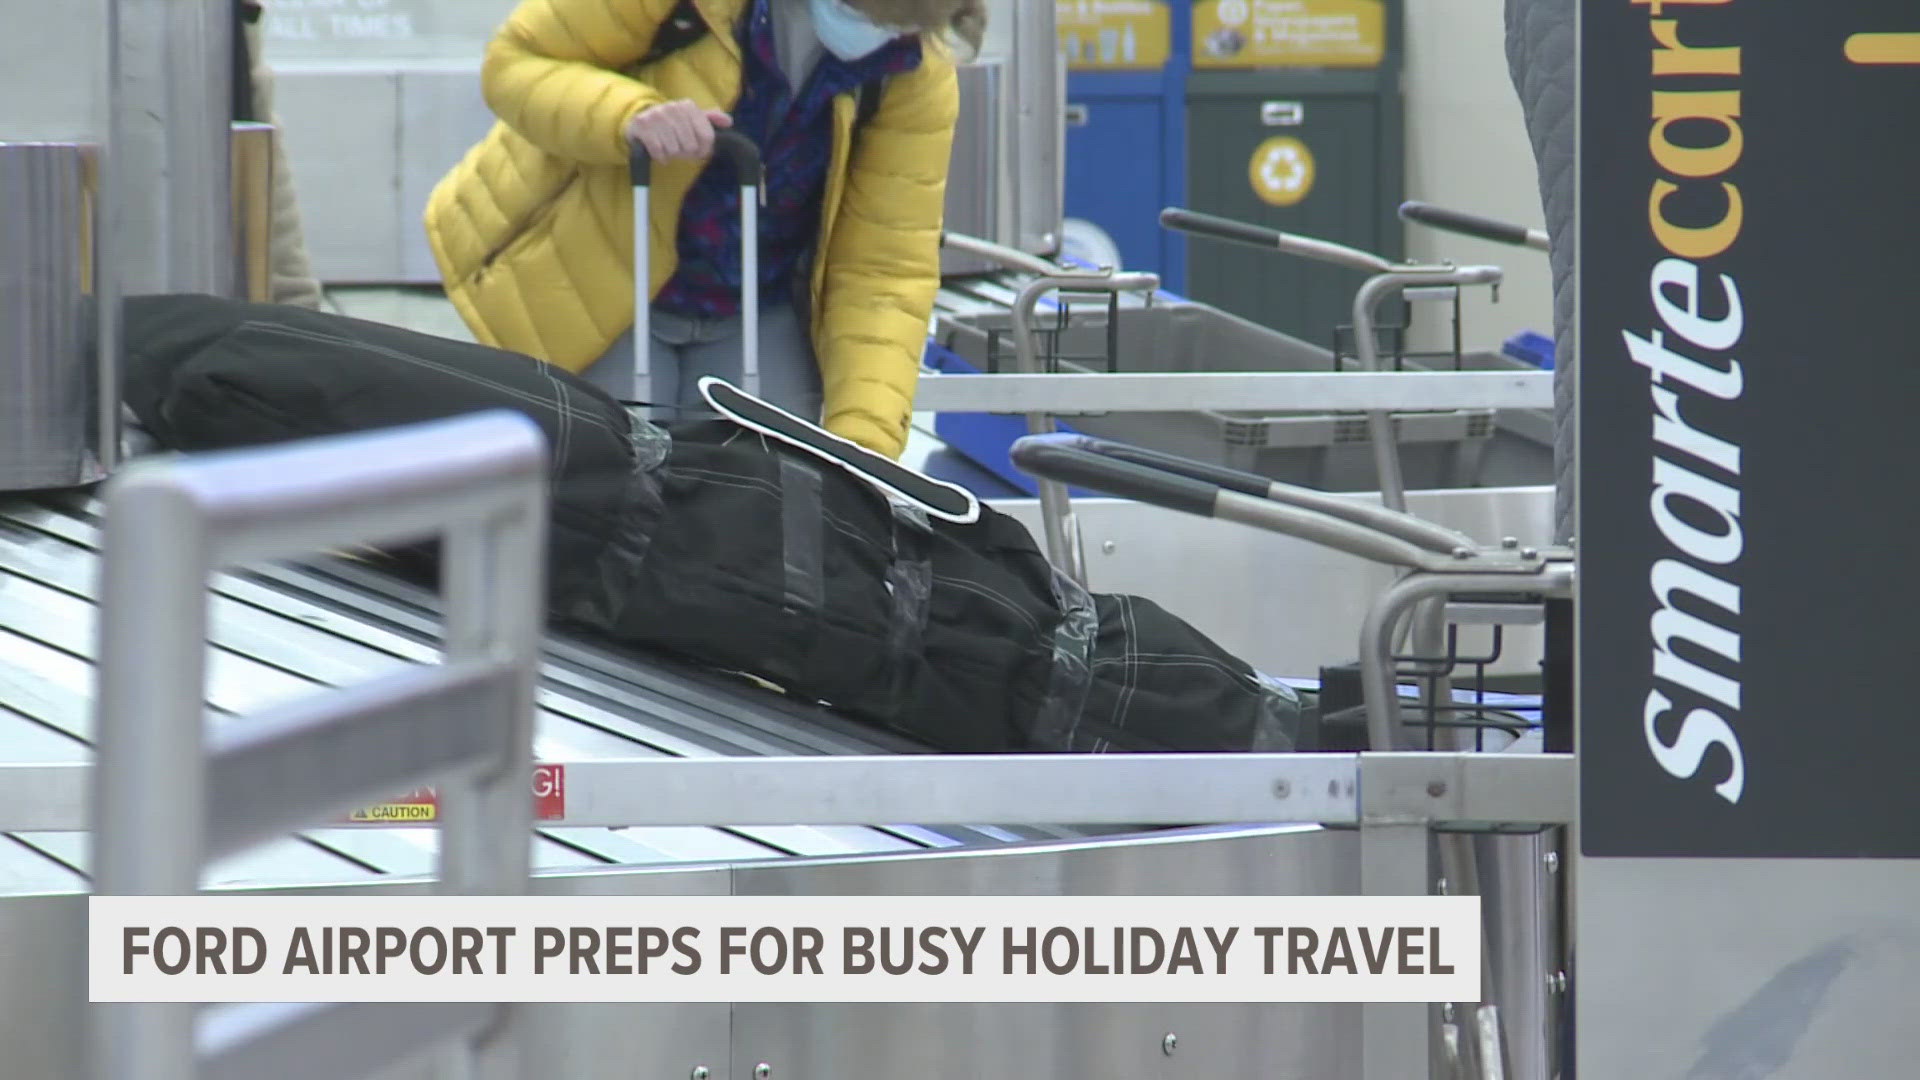 More than 100,000 passengers are estimated to be flying in and out of the airport from June 30 through July 7.